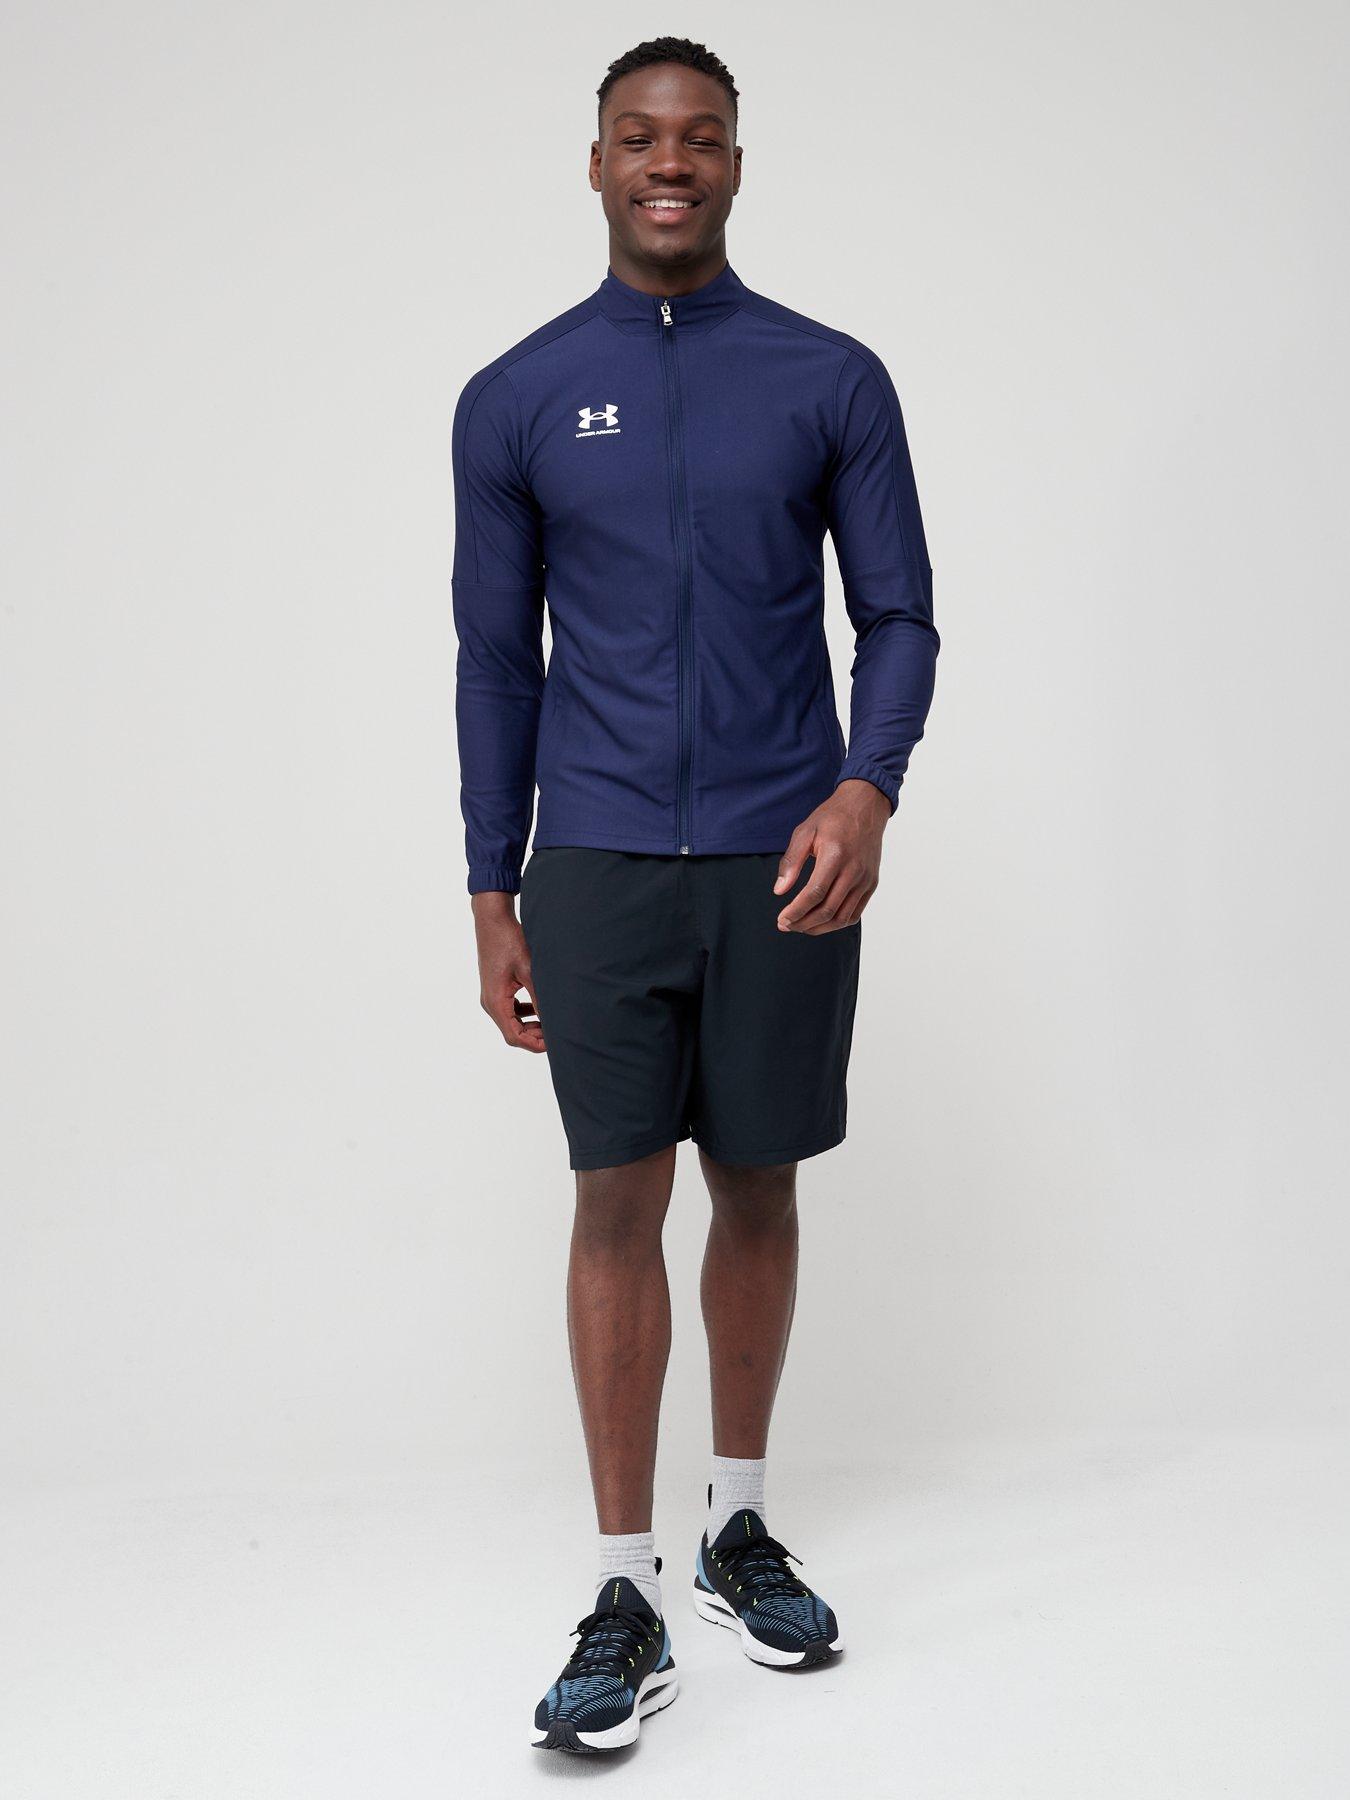 UNDER ARMOUR Challenger Track Jacket - Navy